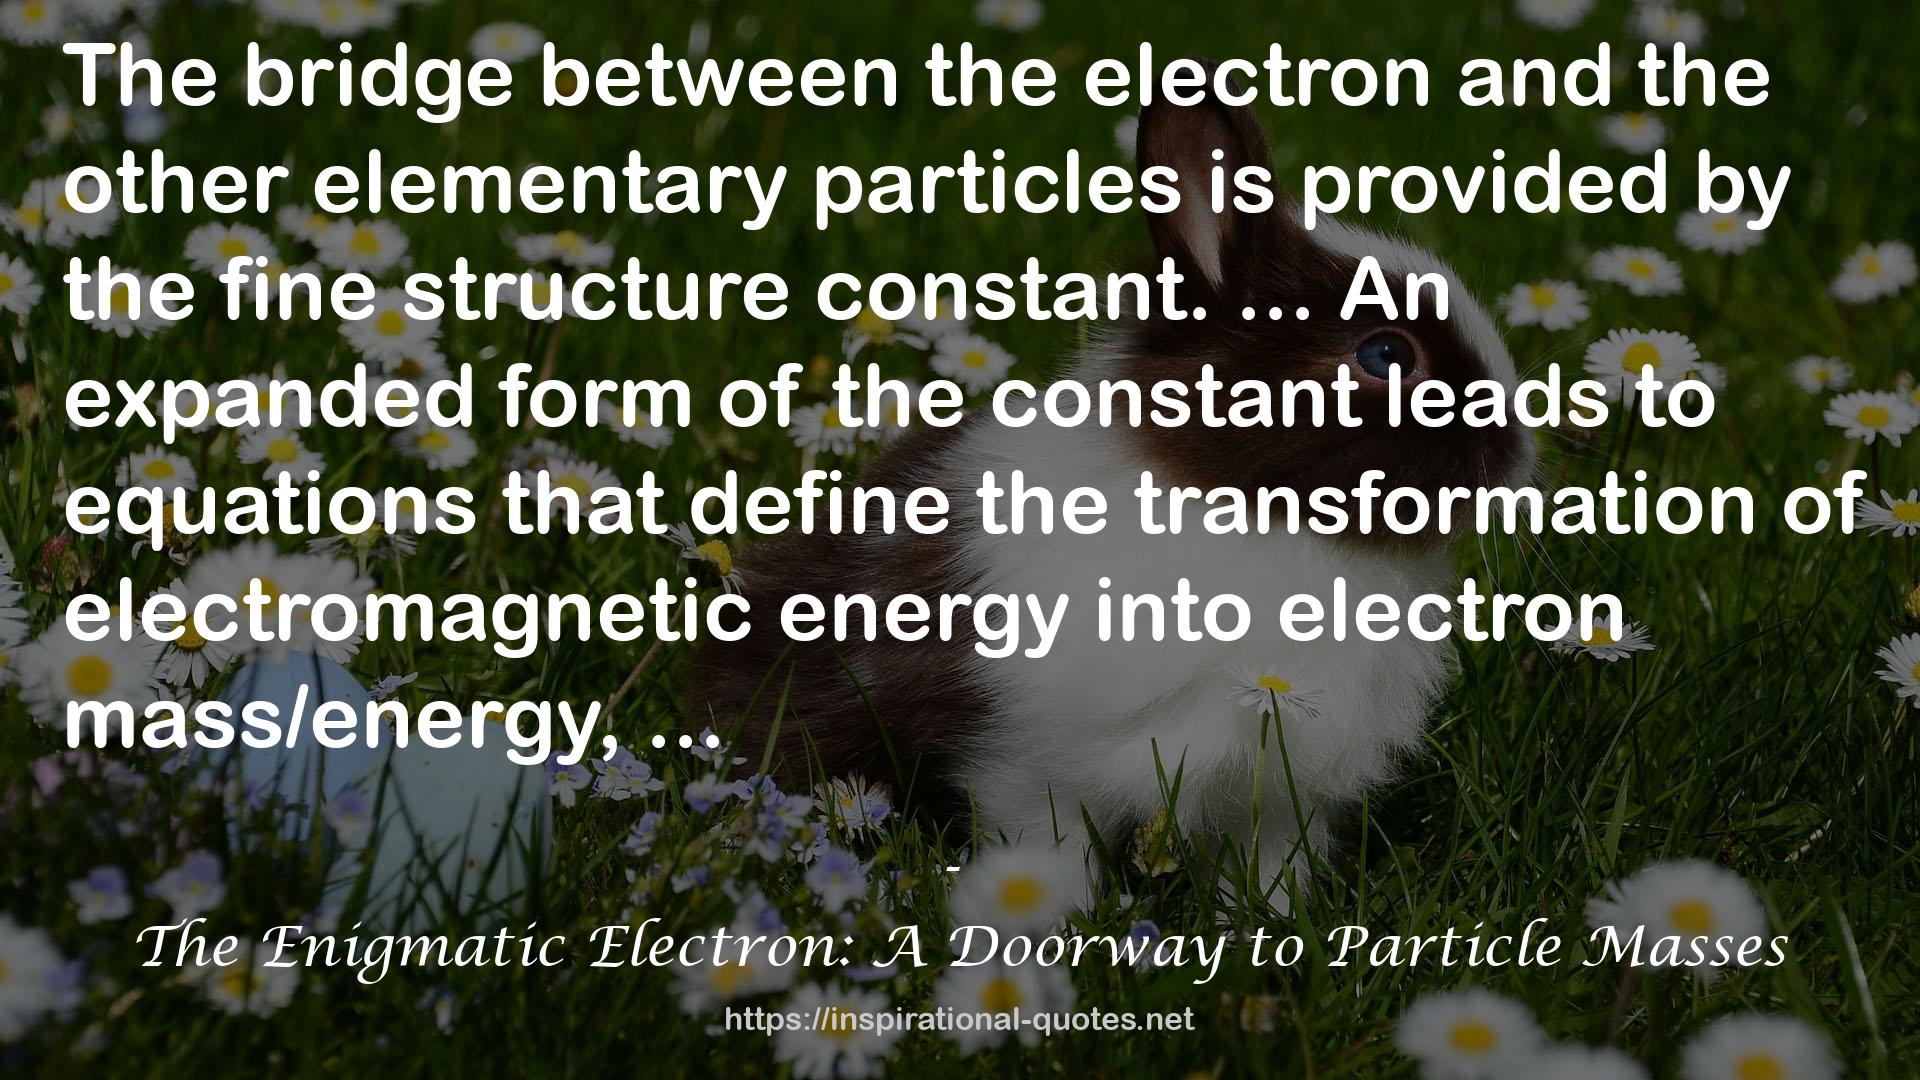 The Enigmatic Electron: A Doorway to Particle Masses QUOTES